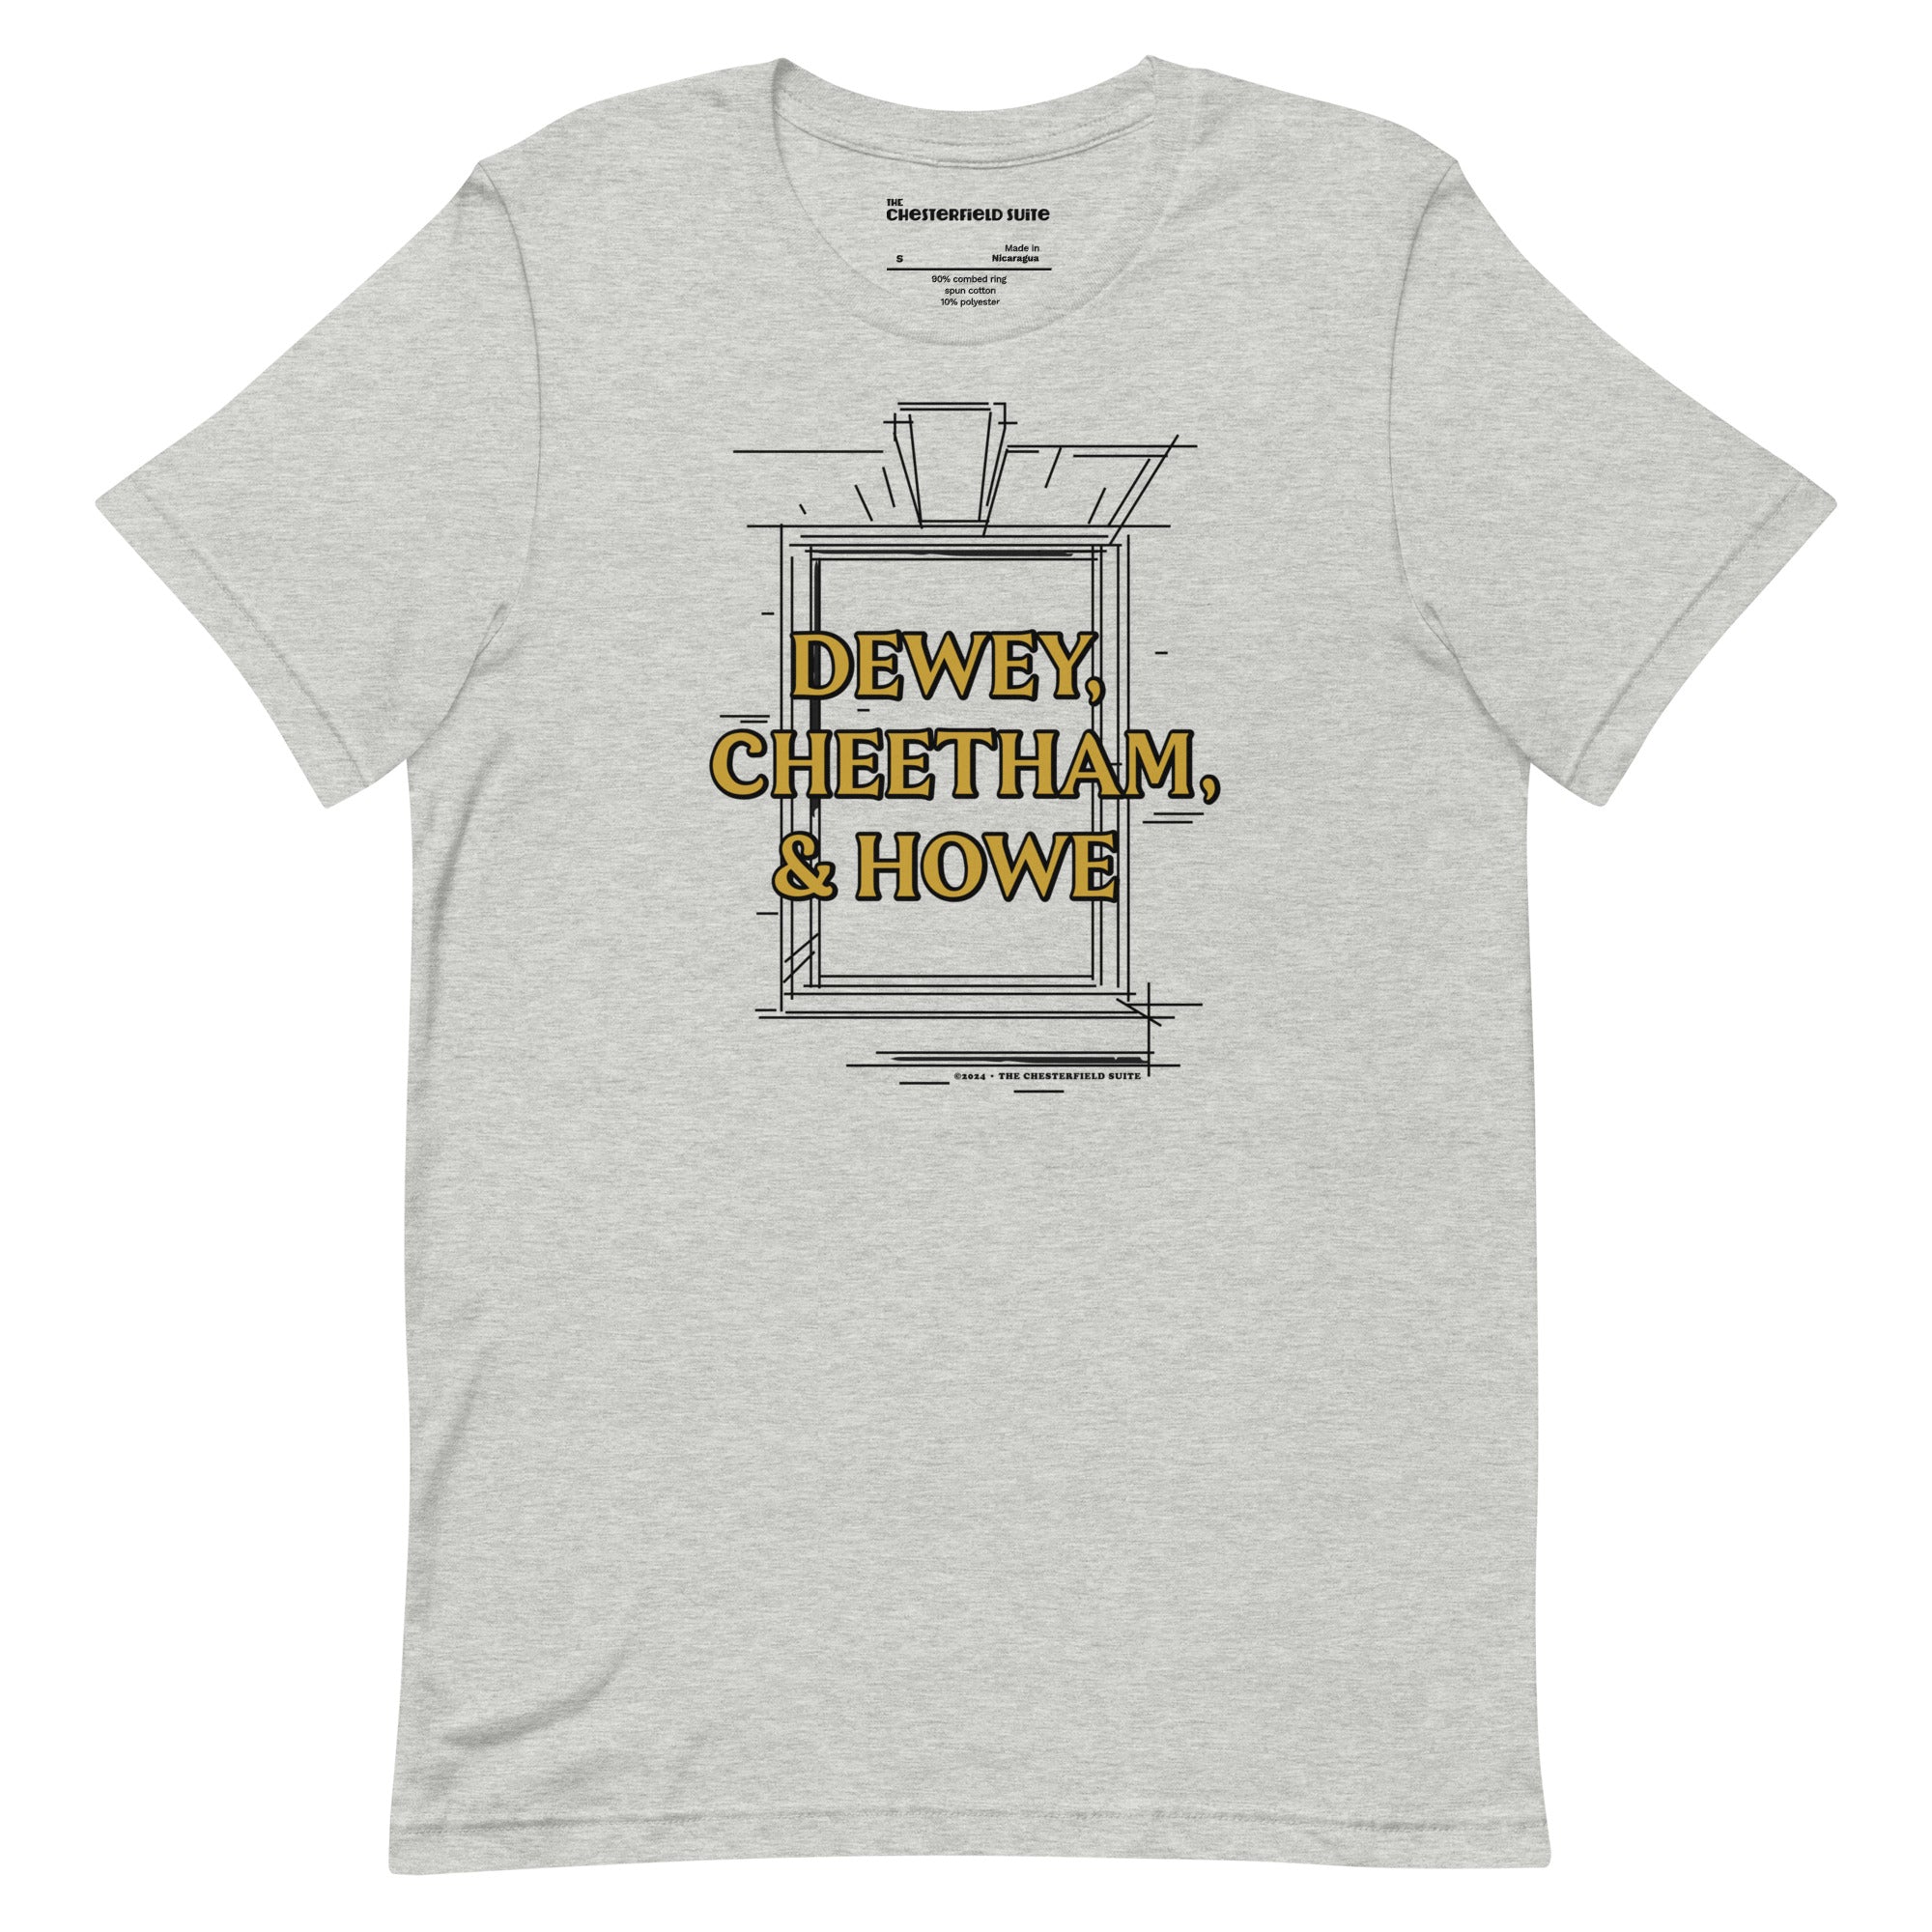 Light grey unisex t-shirt with Dewey Cheetham & Howe from Harvard square written on in gold